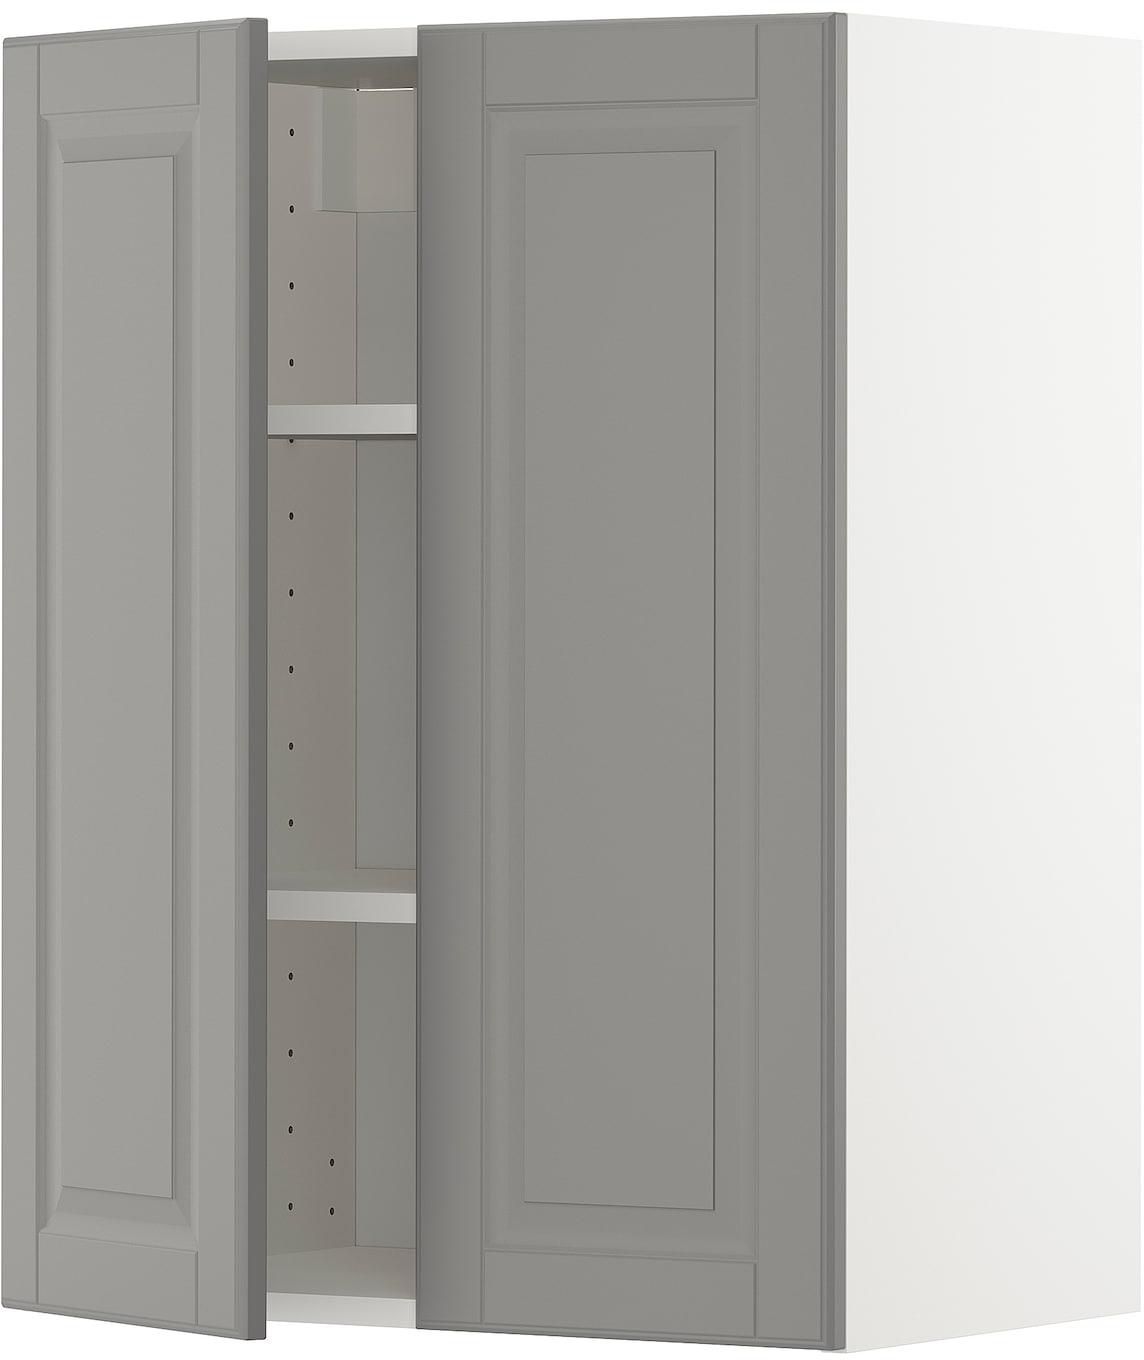 METOD Wall cabinet with shelves/2 doors - white/Bodbyn grey 60x80 cm